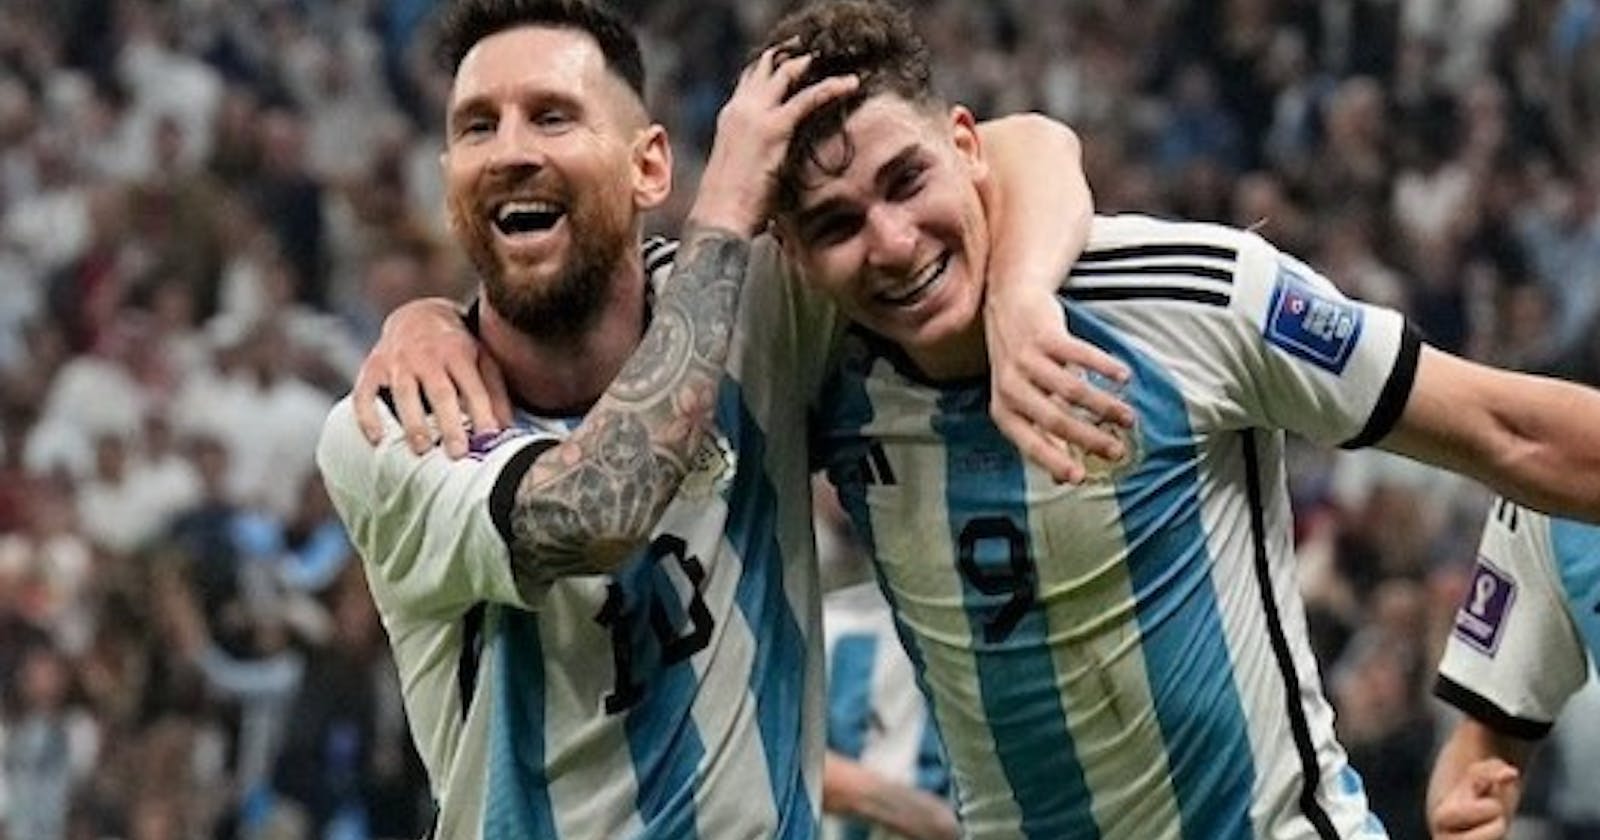 Summary of 2022 World Cup Results: Argentina vs Croatia, Messi is Amazing!